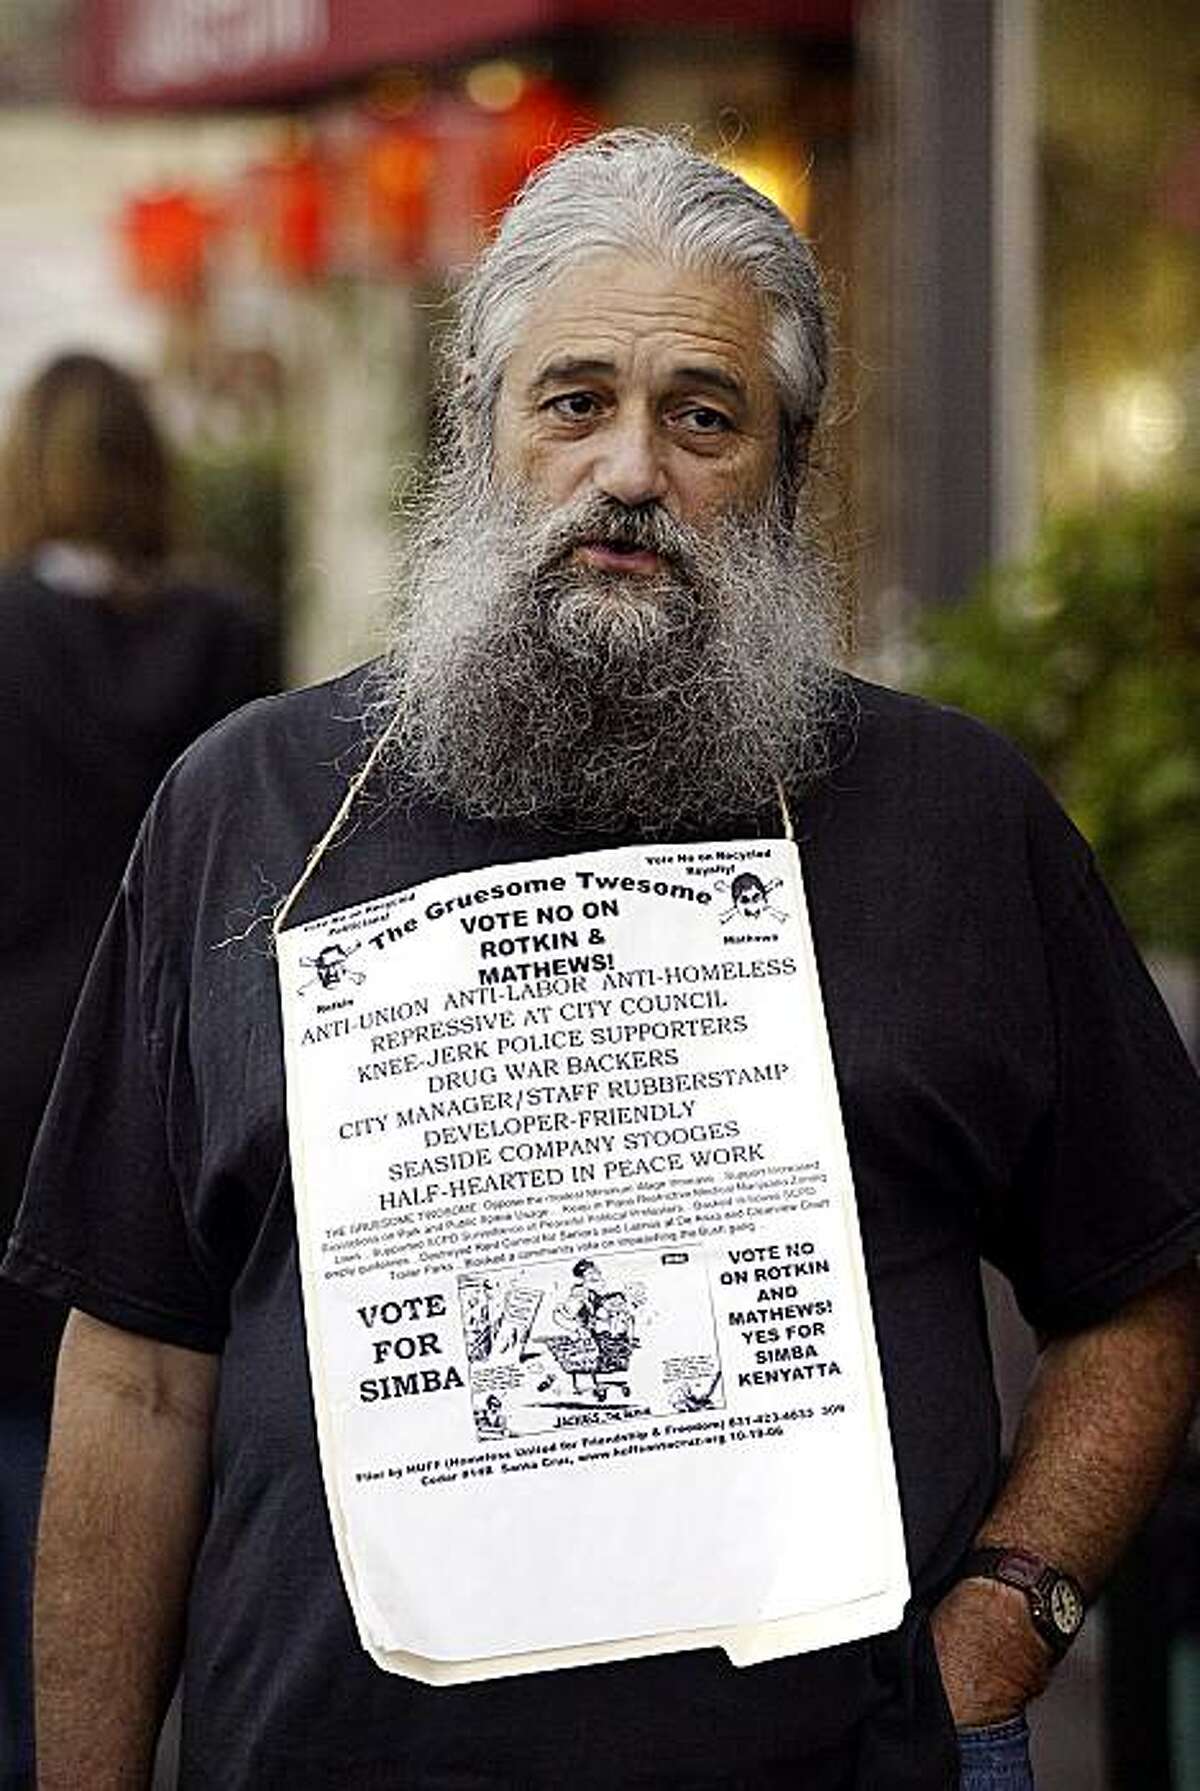 This photo taken Friday, Nov. 6, 2009 shows homeless advocate Robert Norse in Santa Cruz, Calif. Norse's Nazi salute lasted fewer then five seconds before he was removed from the Santa Cruz City Council meeting in handcuffs. But Santa Claus-bearded gadfly's free speech lawsuit against the city has lasted more than six years and may be destined for the U.S. Supreme Court.